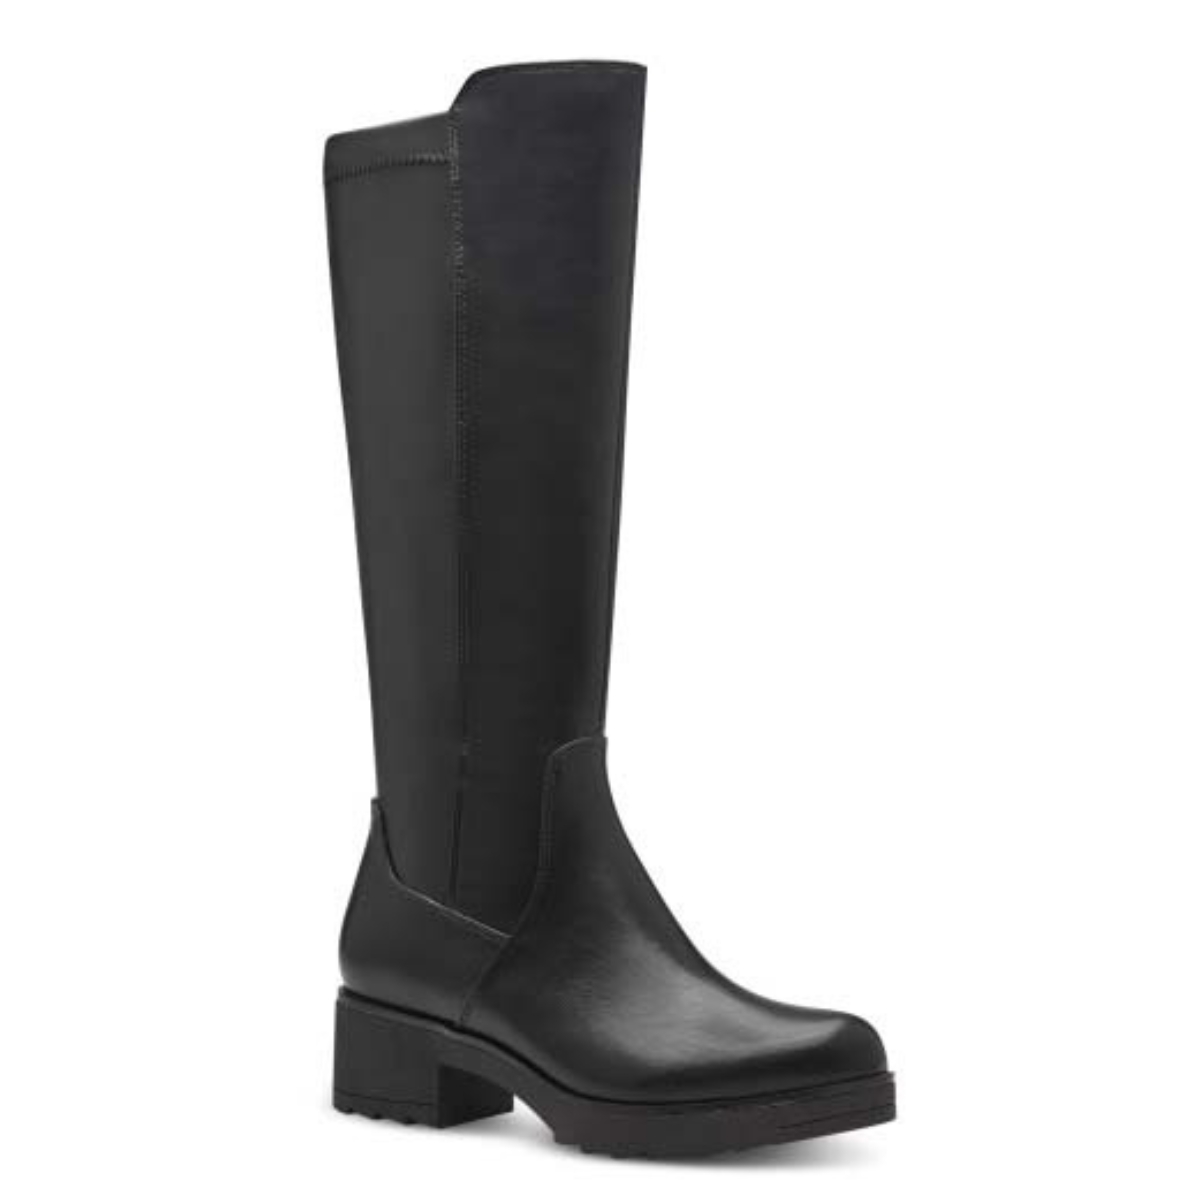 Marco Tozzi Dono Long Black Womens Knee-High Boots 25606-41-001 In Size 36 In Plain Black